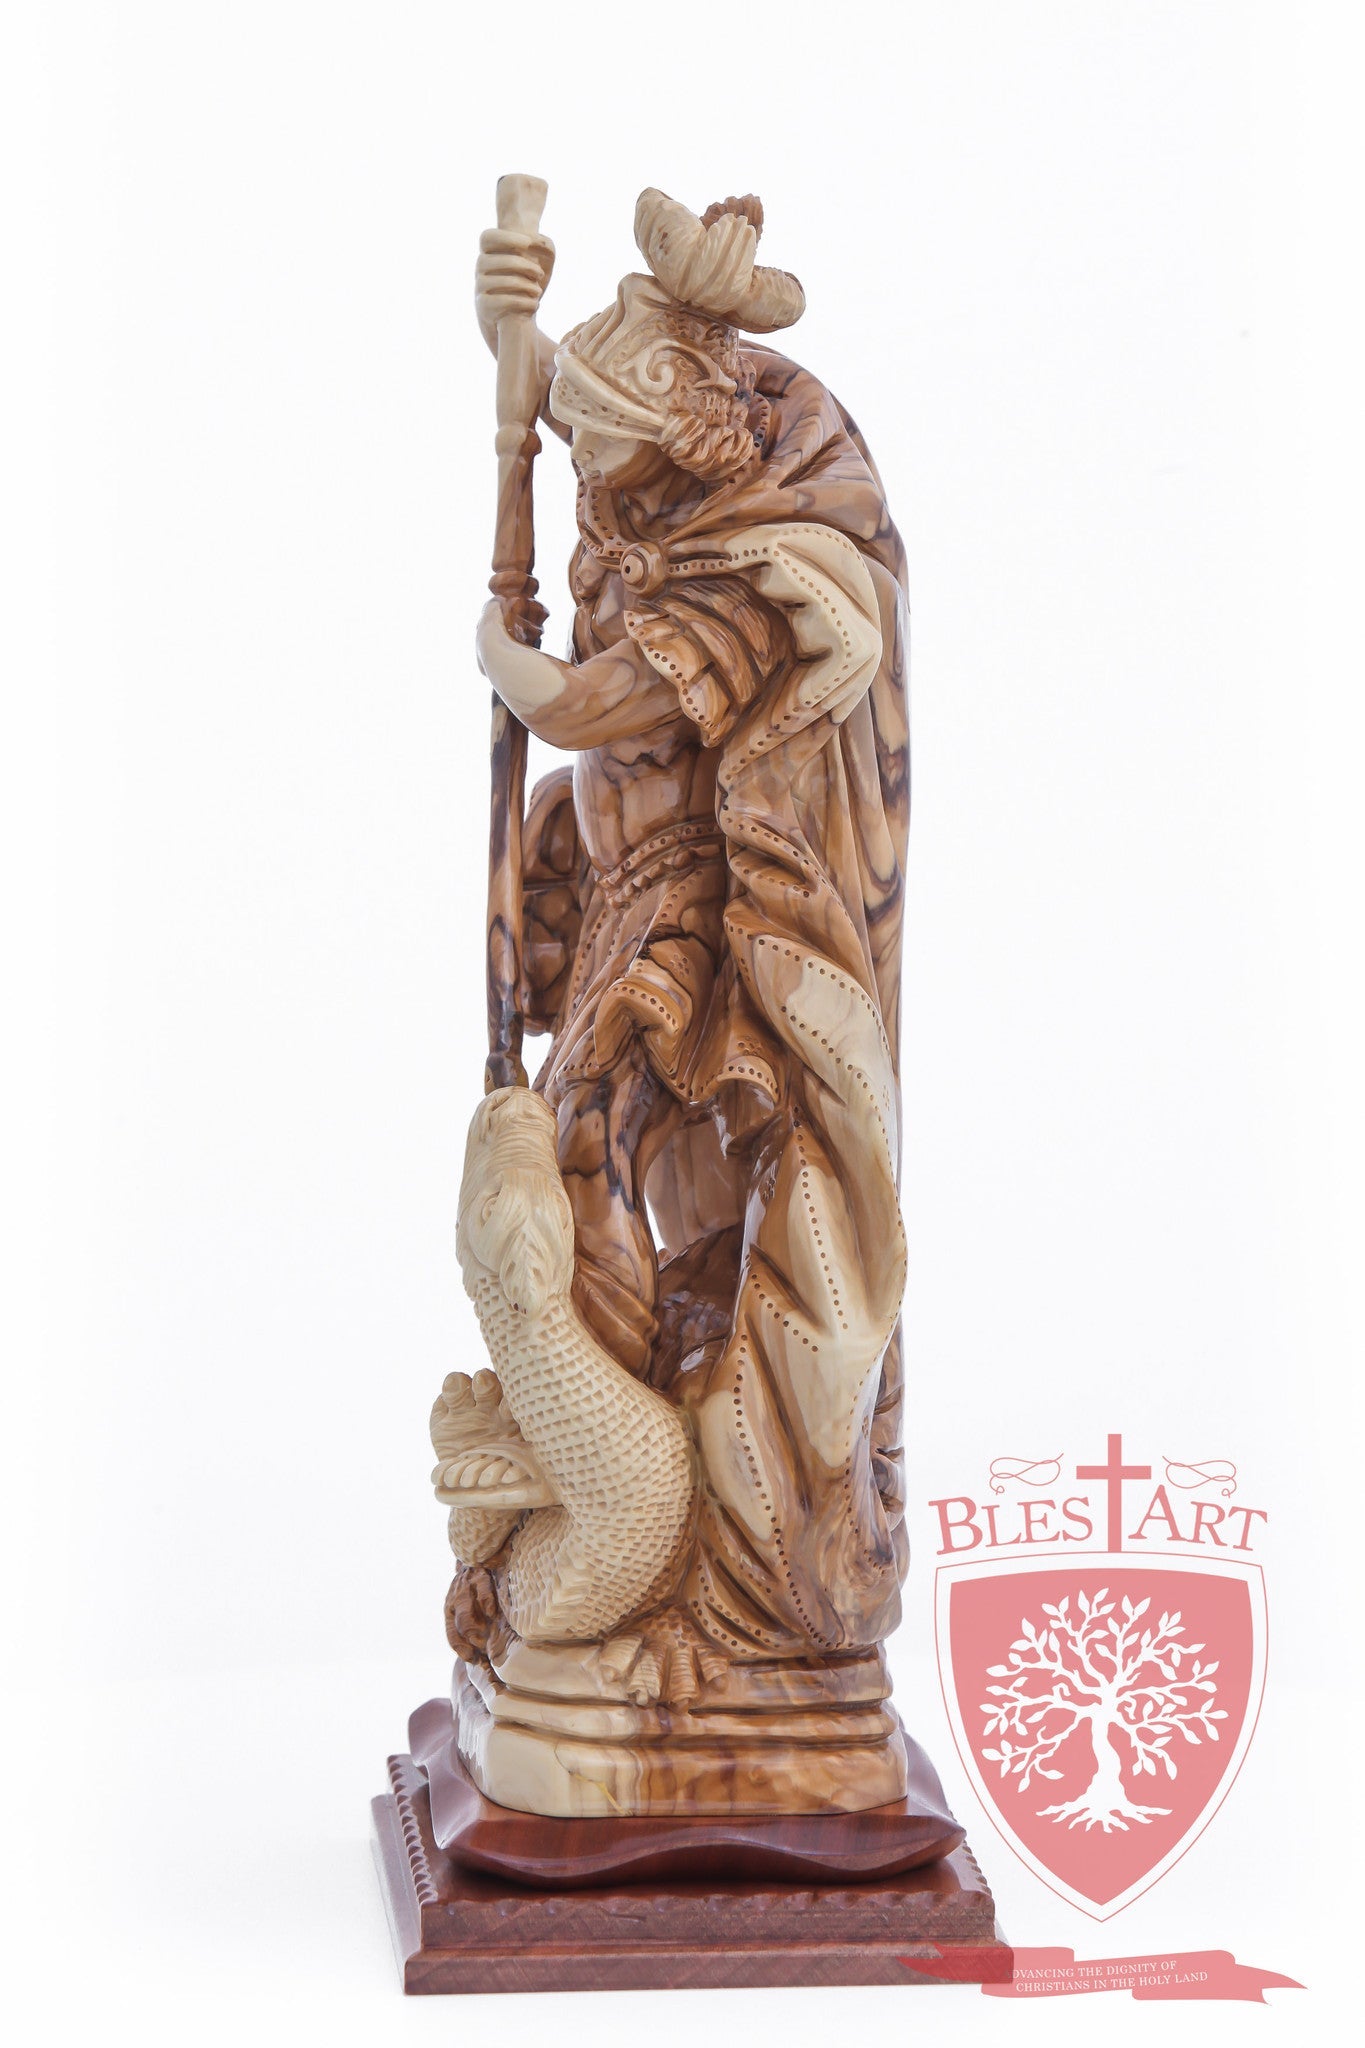 St. Michael the Archangel, Size: 13.8"/35 cm Height